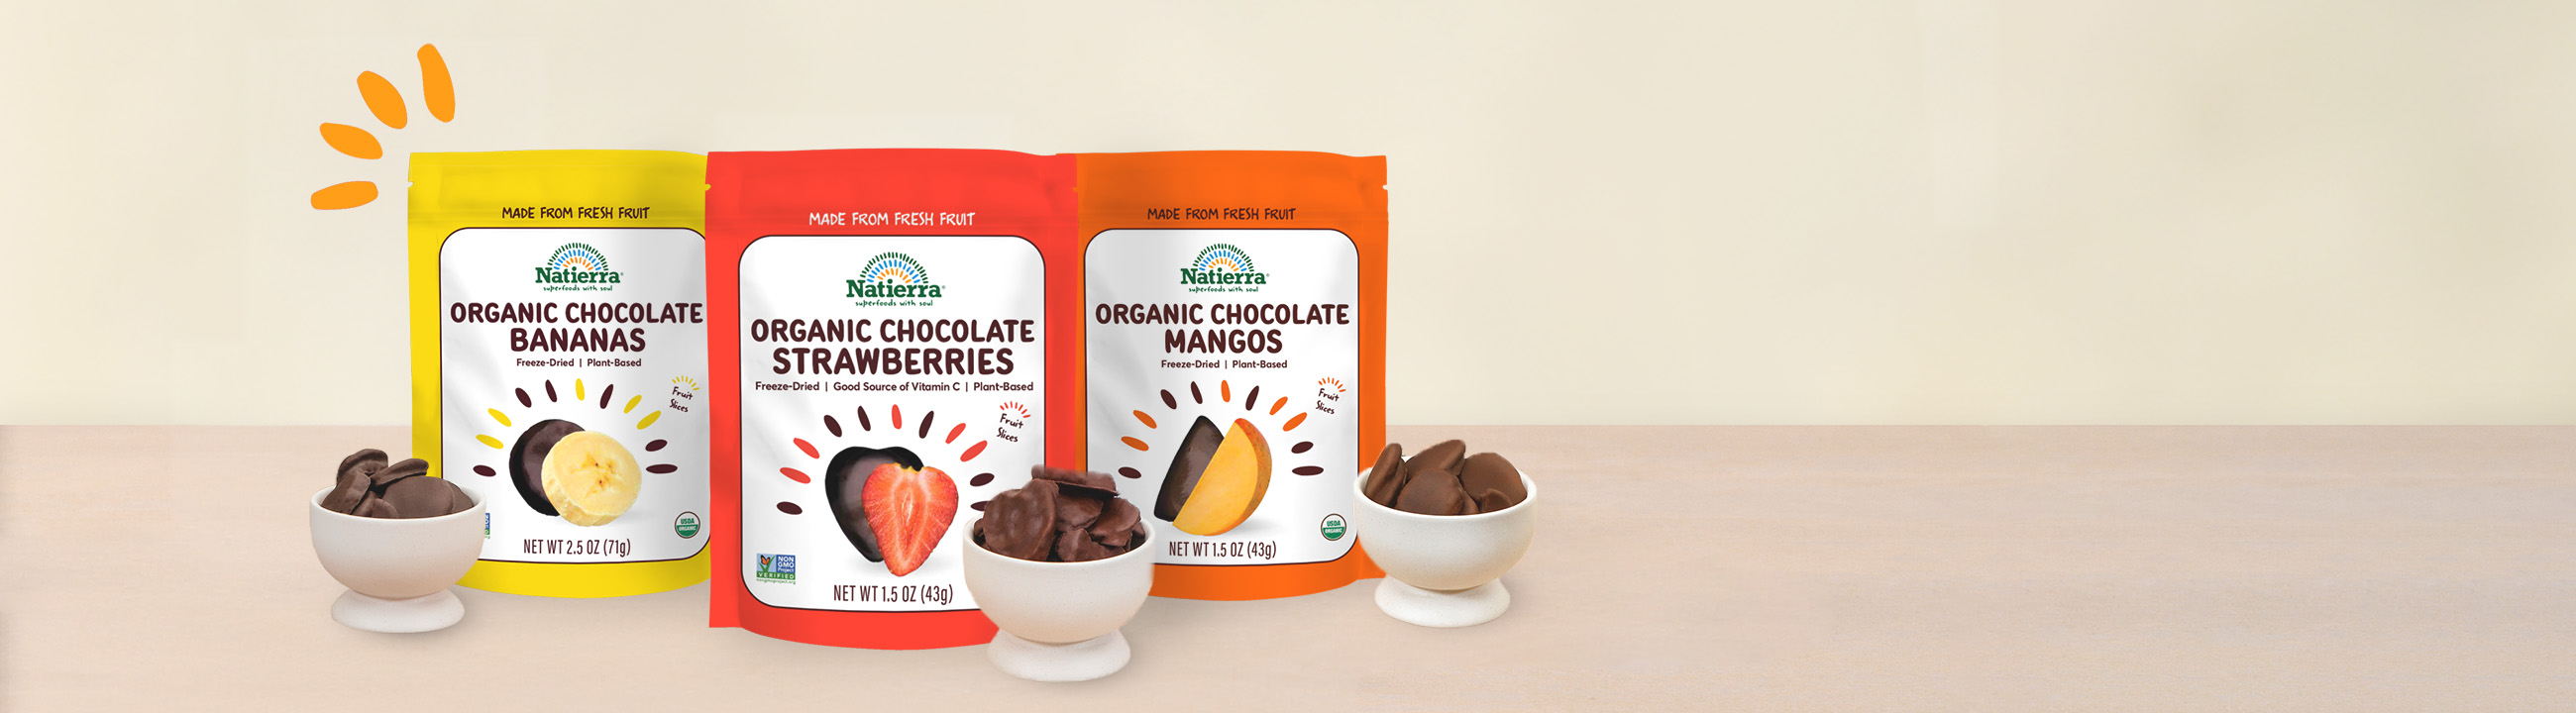 Freeze-dried chocolate-covered products